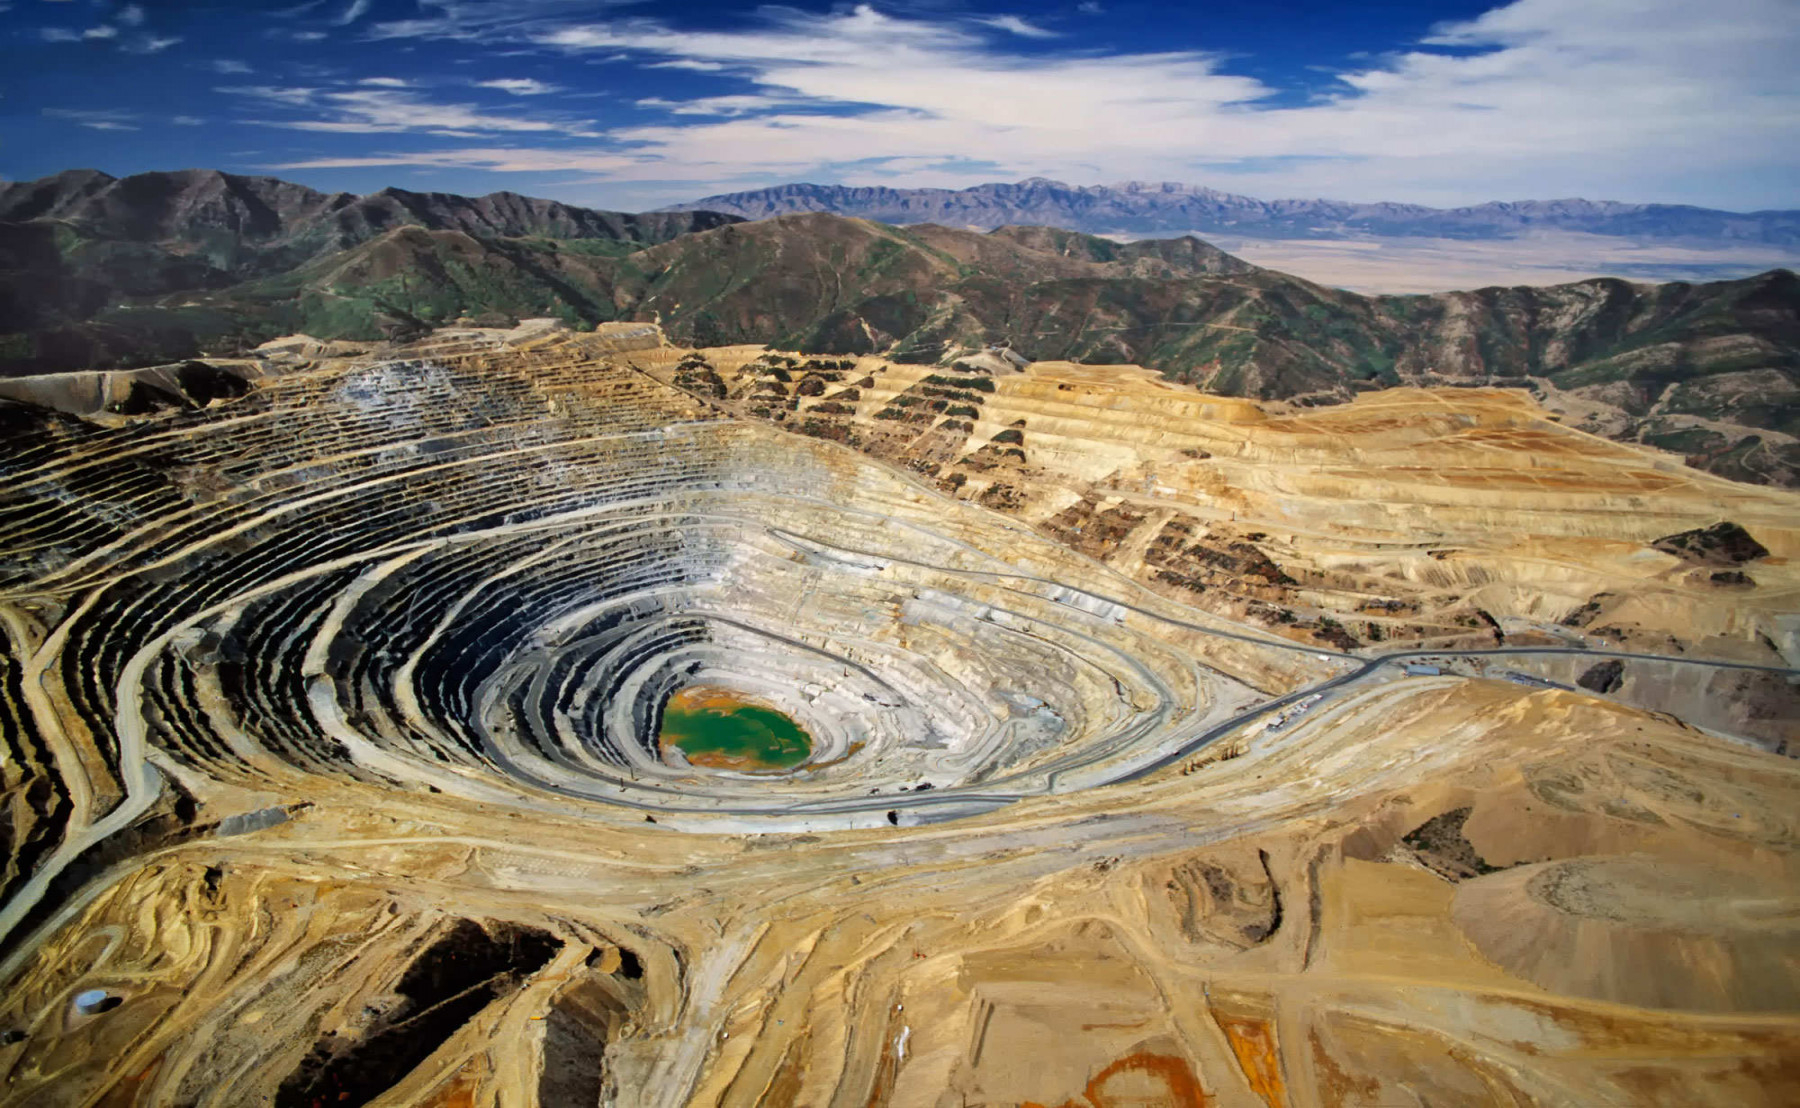 Rio Tinto Kennecott Sitewide Soil Management - Anderson Engineering